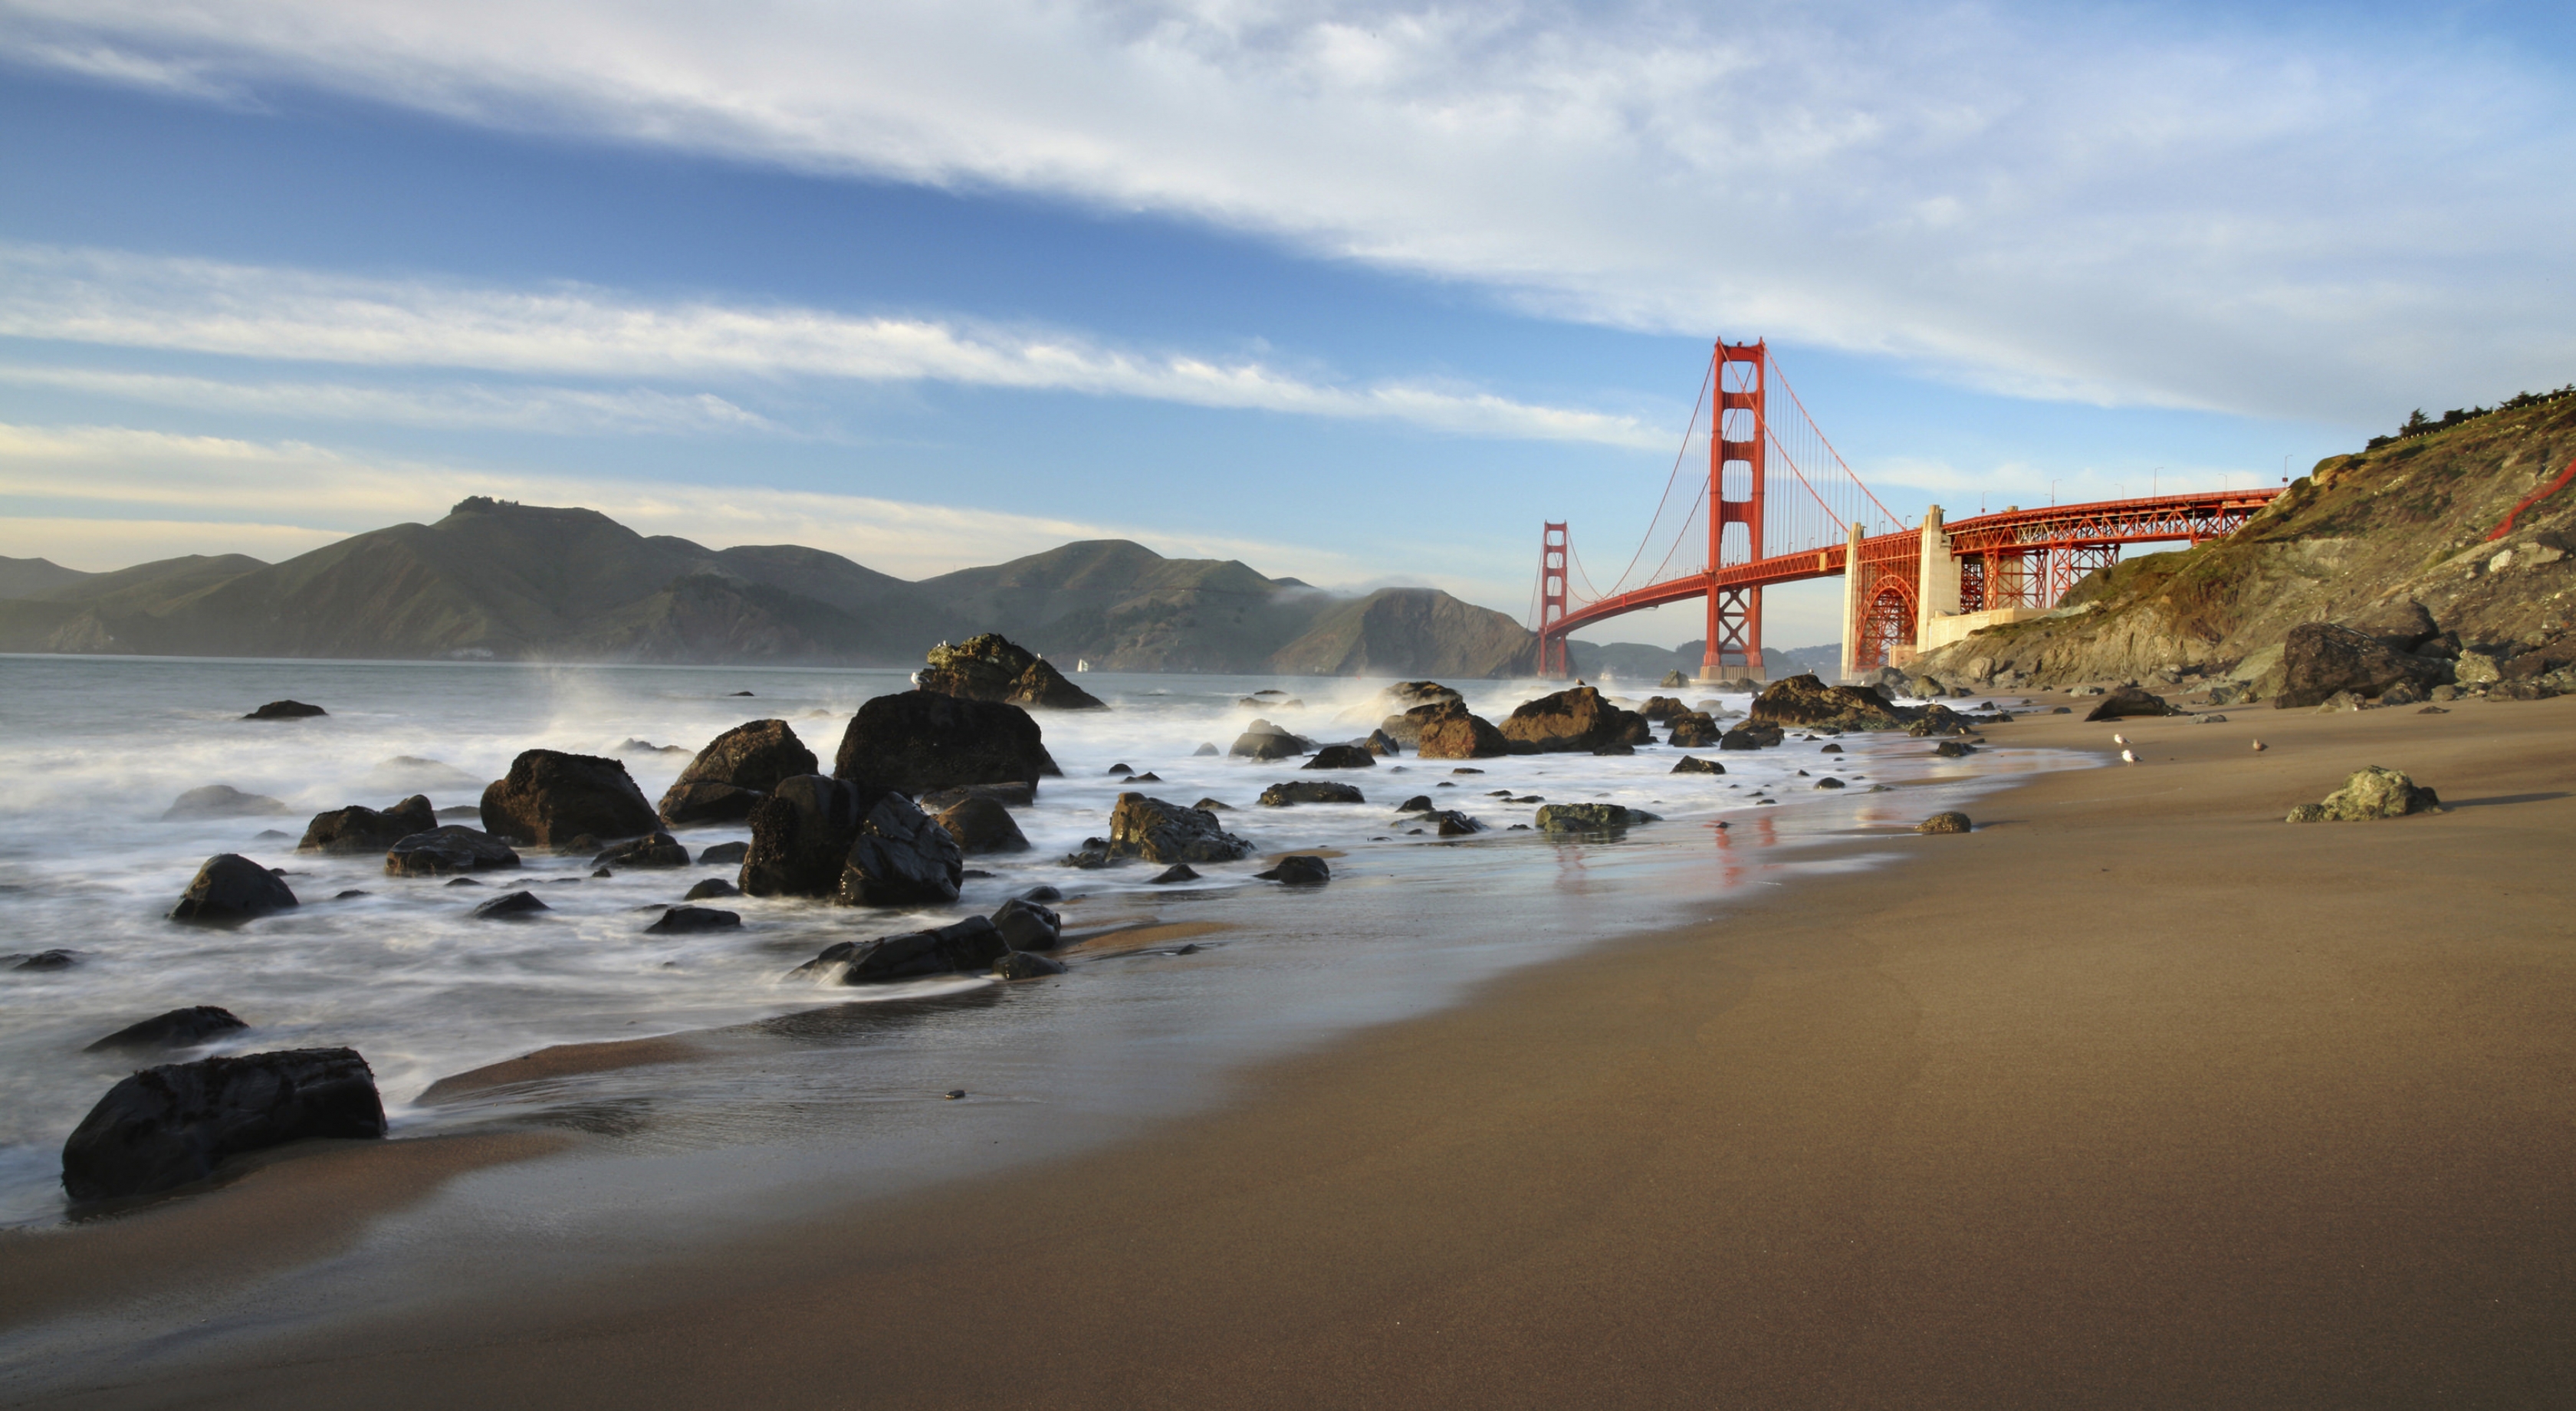 A view of the Golden Gate Bridge from the Marin Beach.